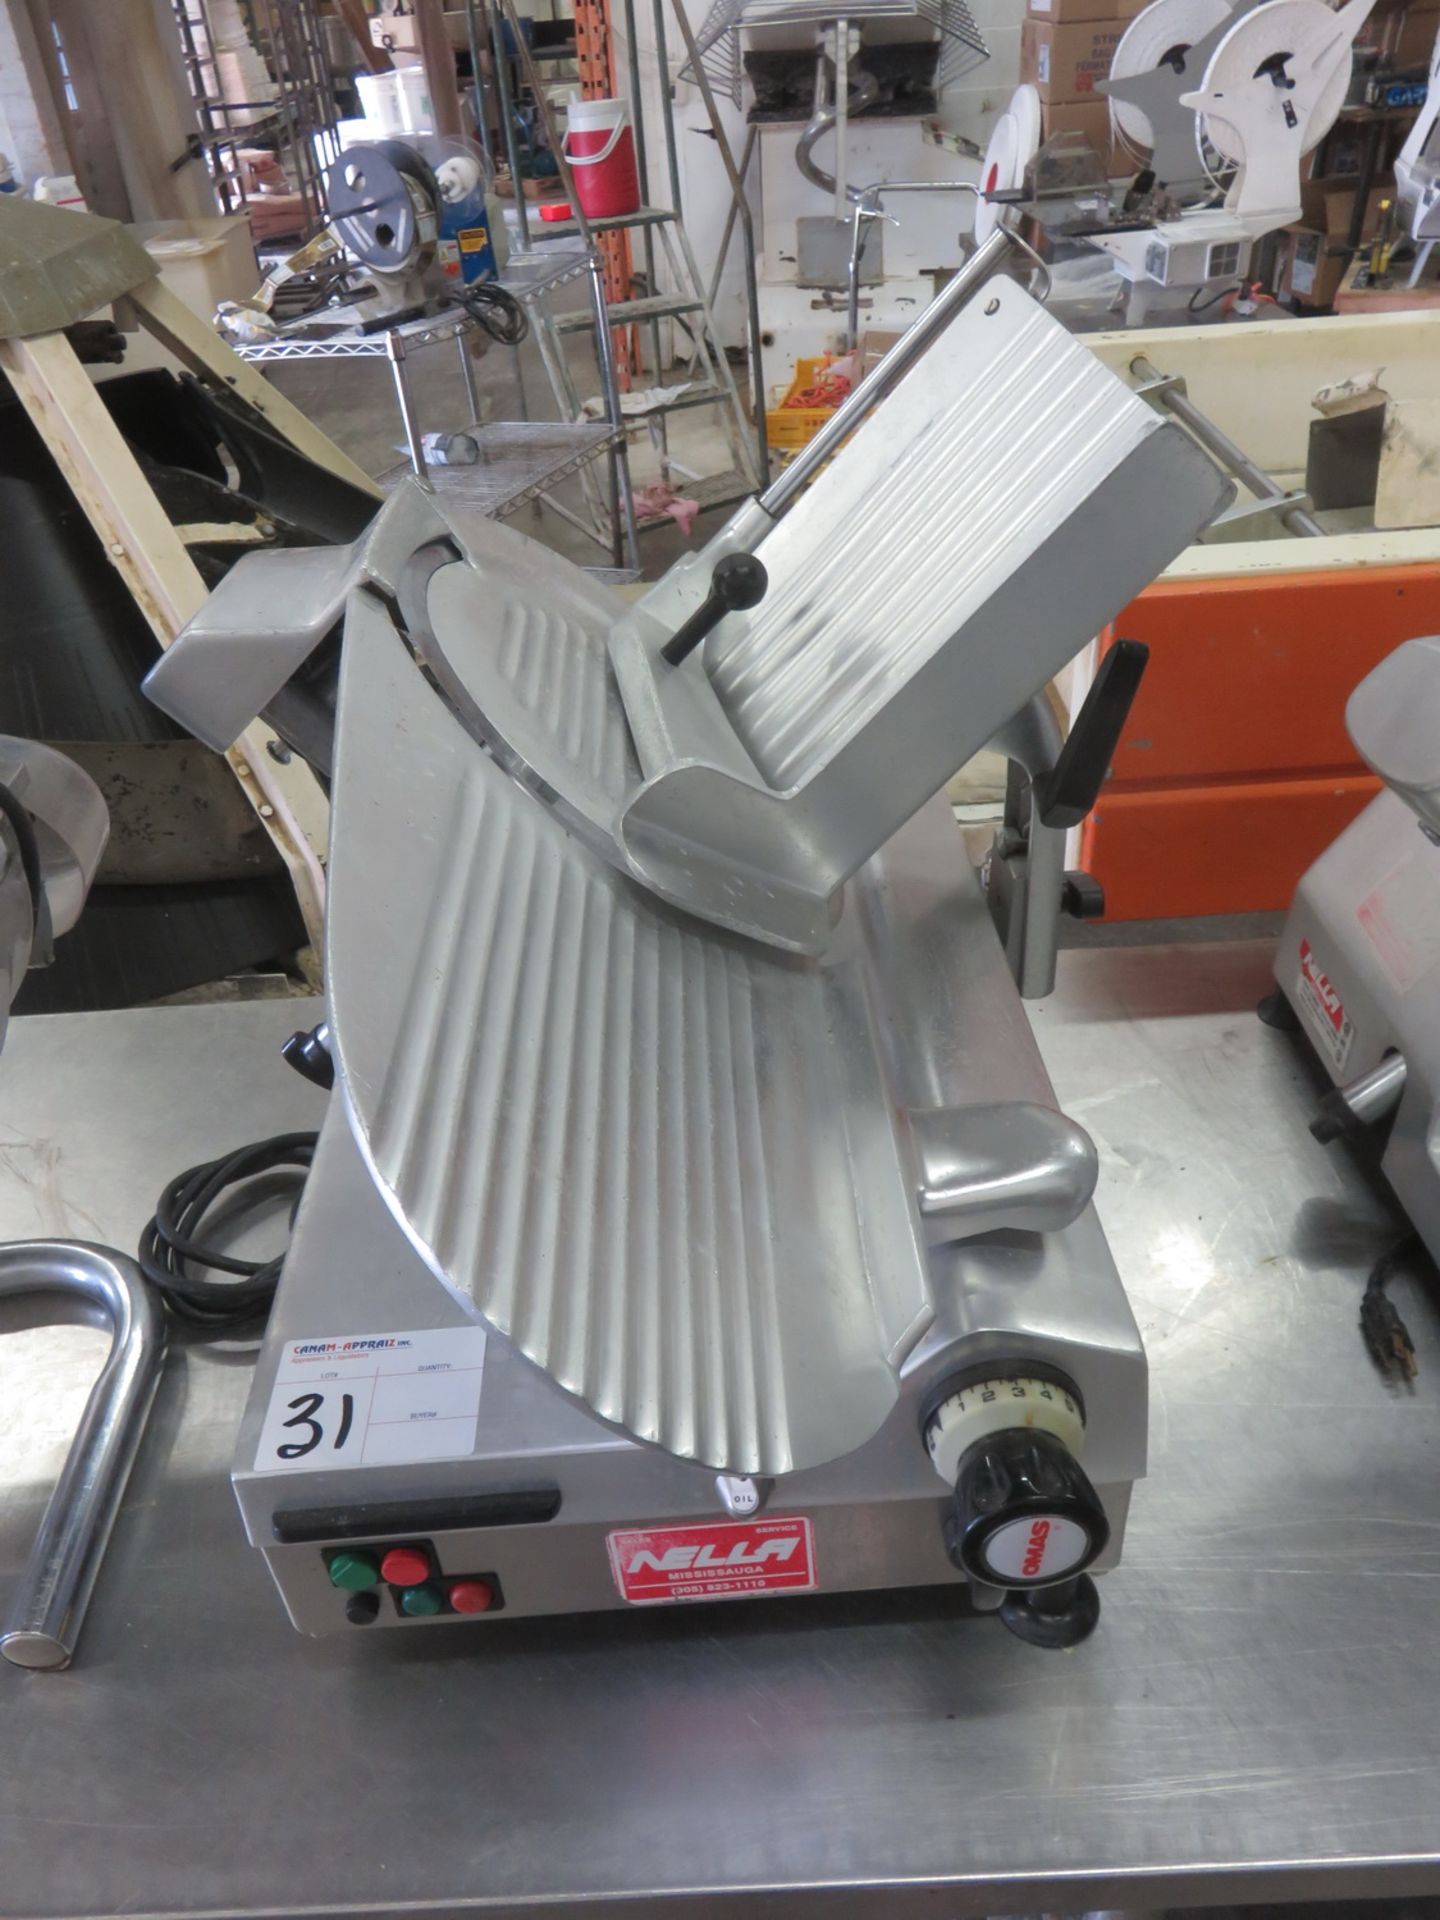 OMAS CX-MATIC 330/N AUTOMATIC GRAVITY SLICER, S/N 817 (110V) (MISSING 1 RUBBER FOOT) - Image 2 of 3